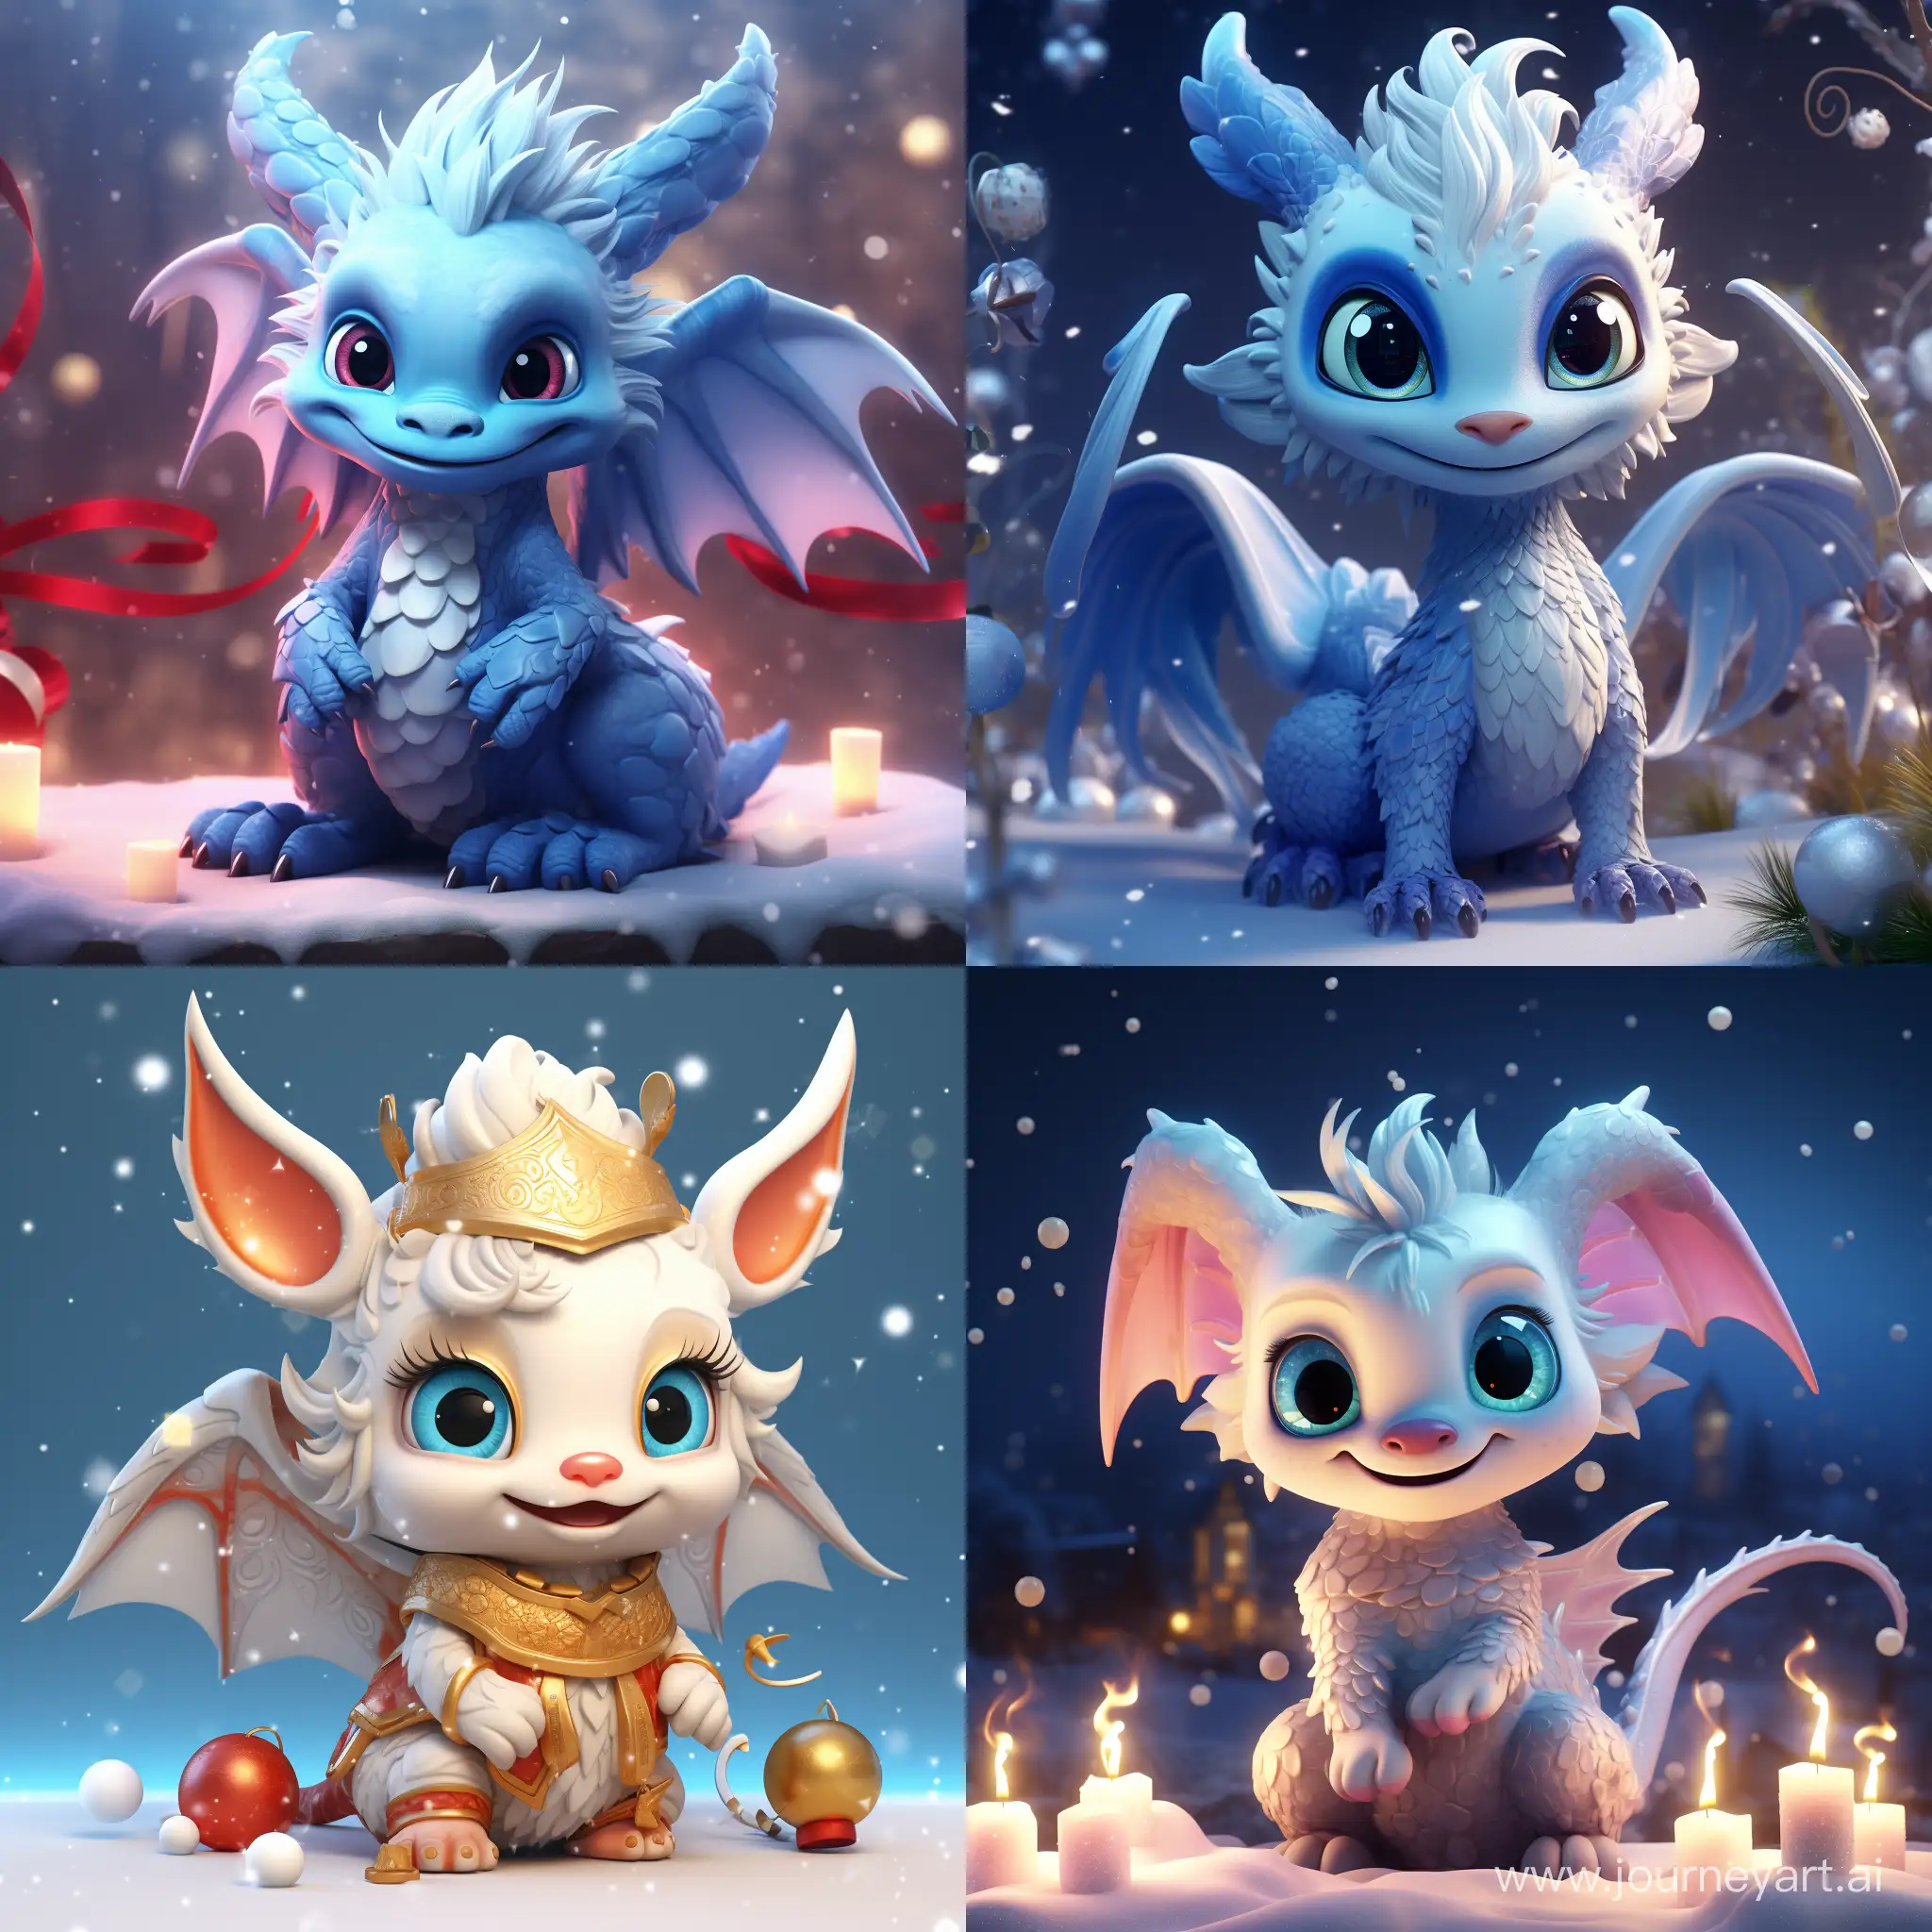 Adorable-New-Year-Dragon-in-High-Detail-Festive-Fantasy-Creature-Photo